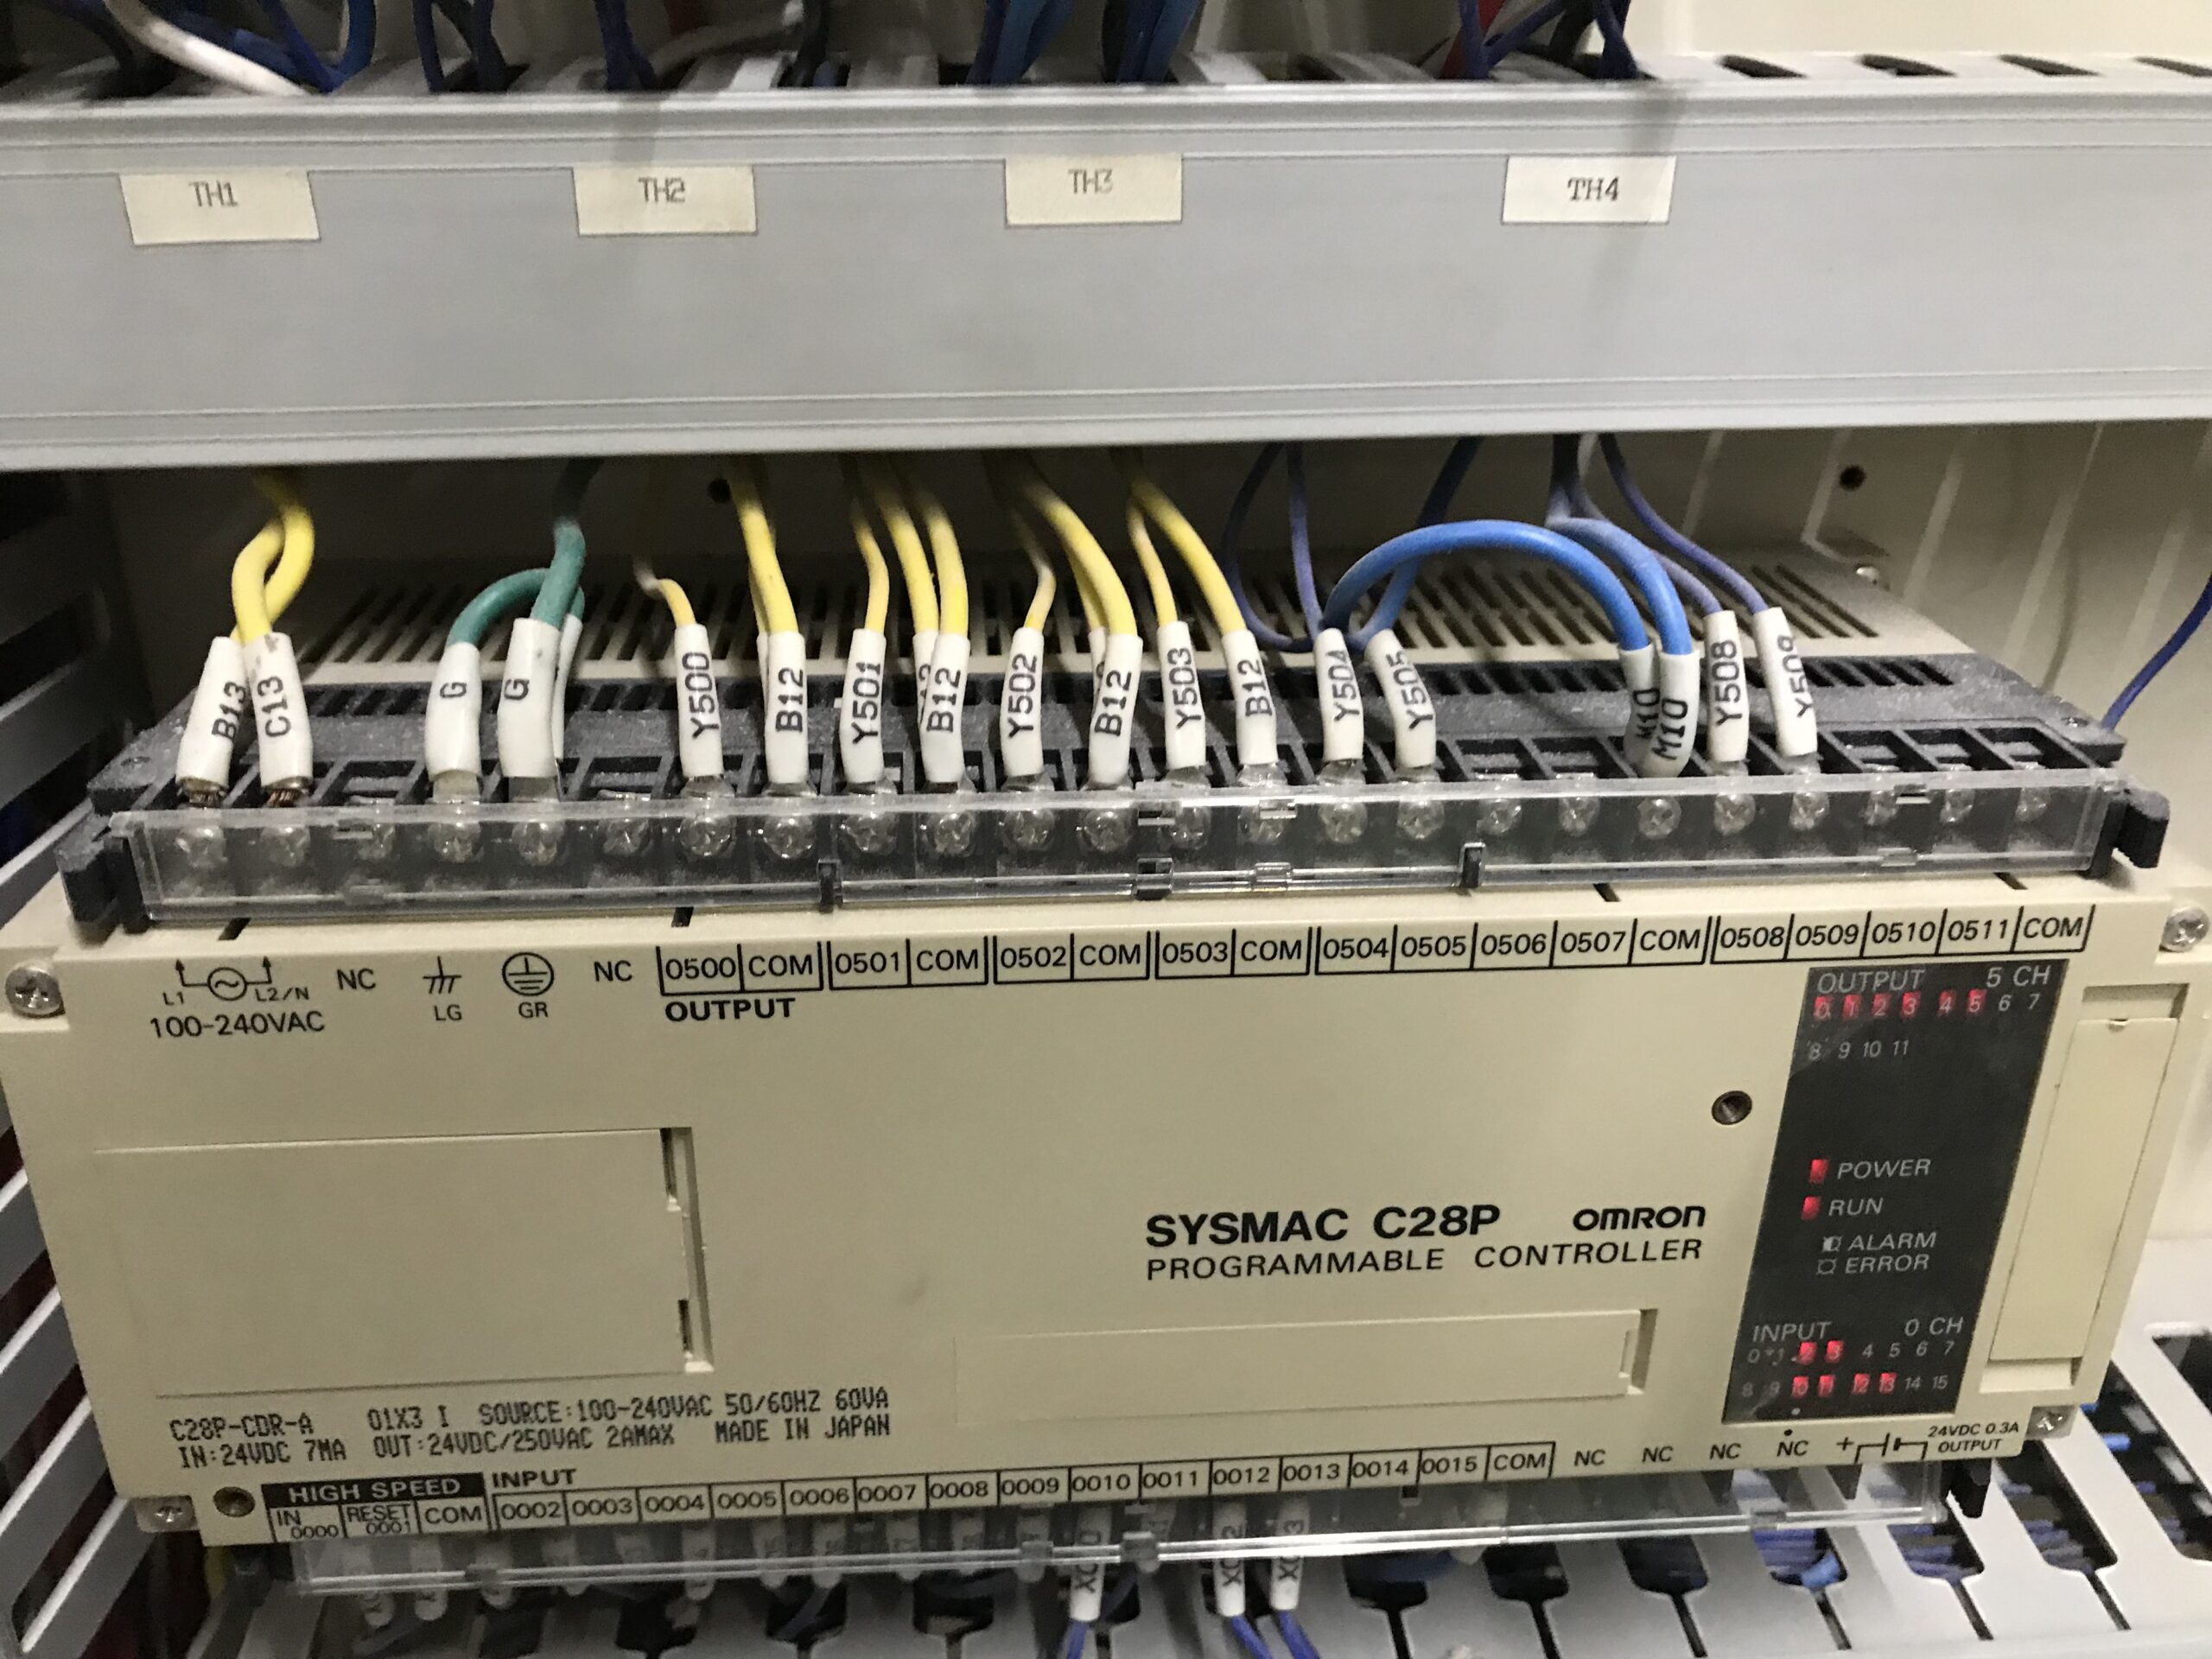 omron sysmac プログラマブルコントローラ | nate-hospital.com